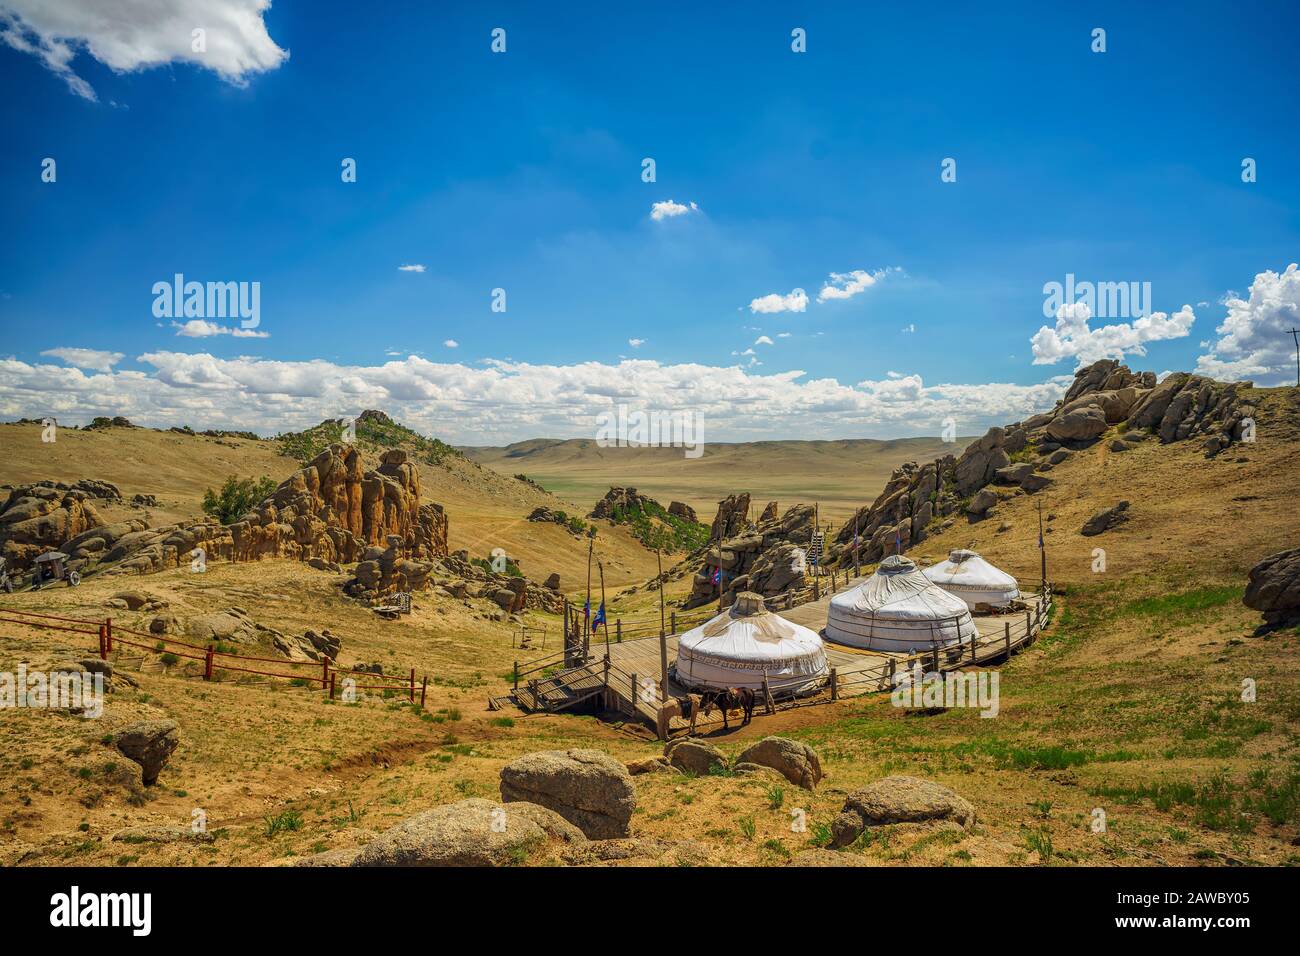 13th century village in Mongolia offers a unique look at the nomadic culture of the Mongolian people. Stock Photo